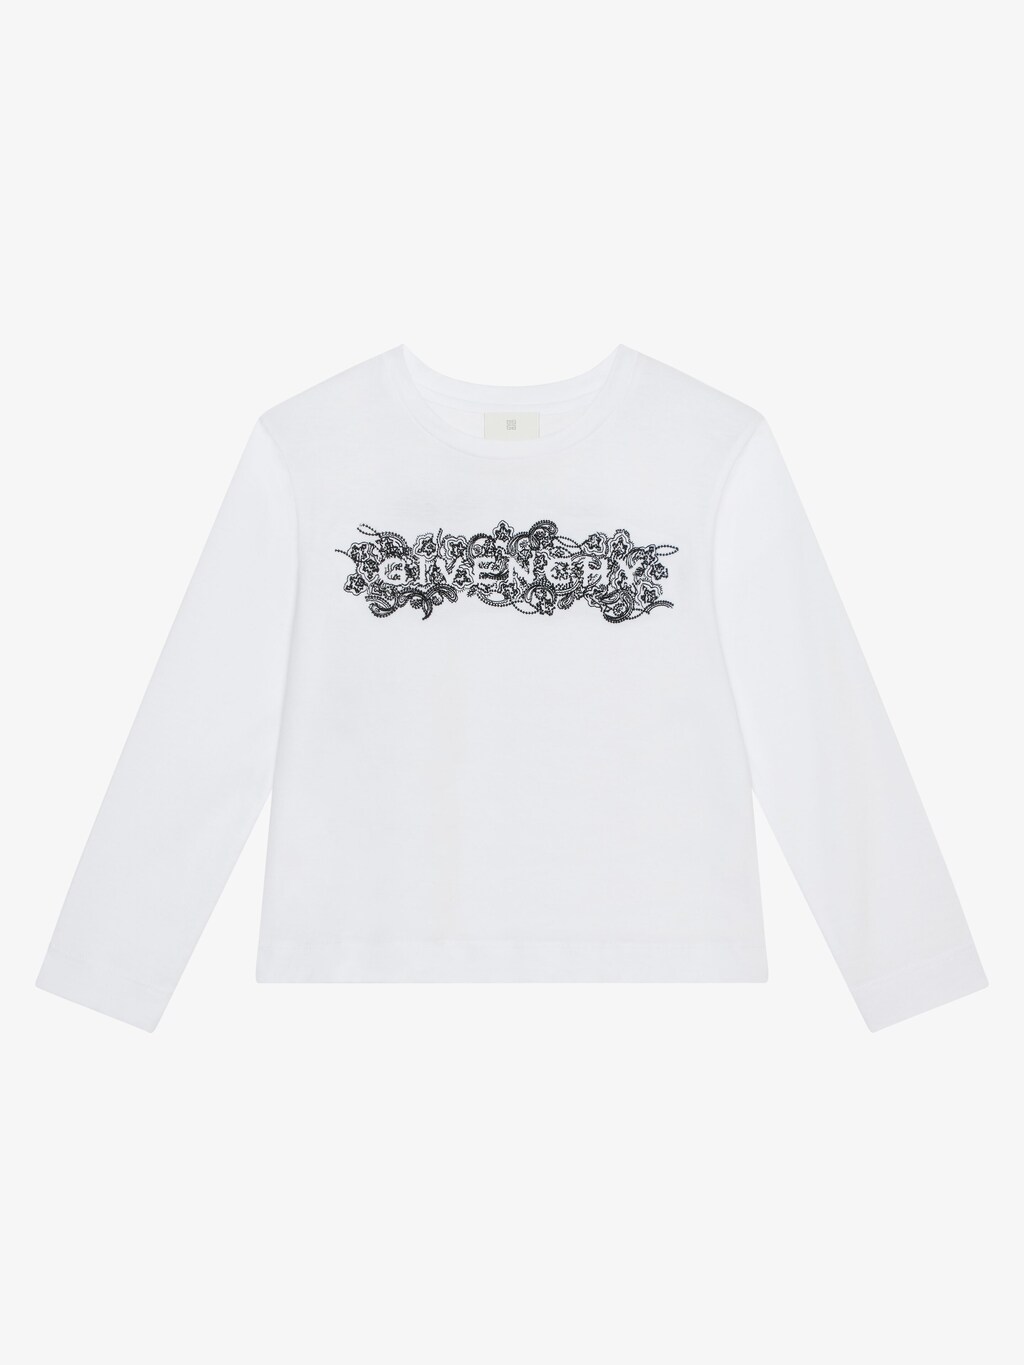 givenchy.com | T-shirt in embroidered jersey